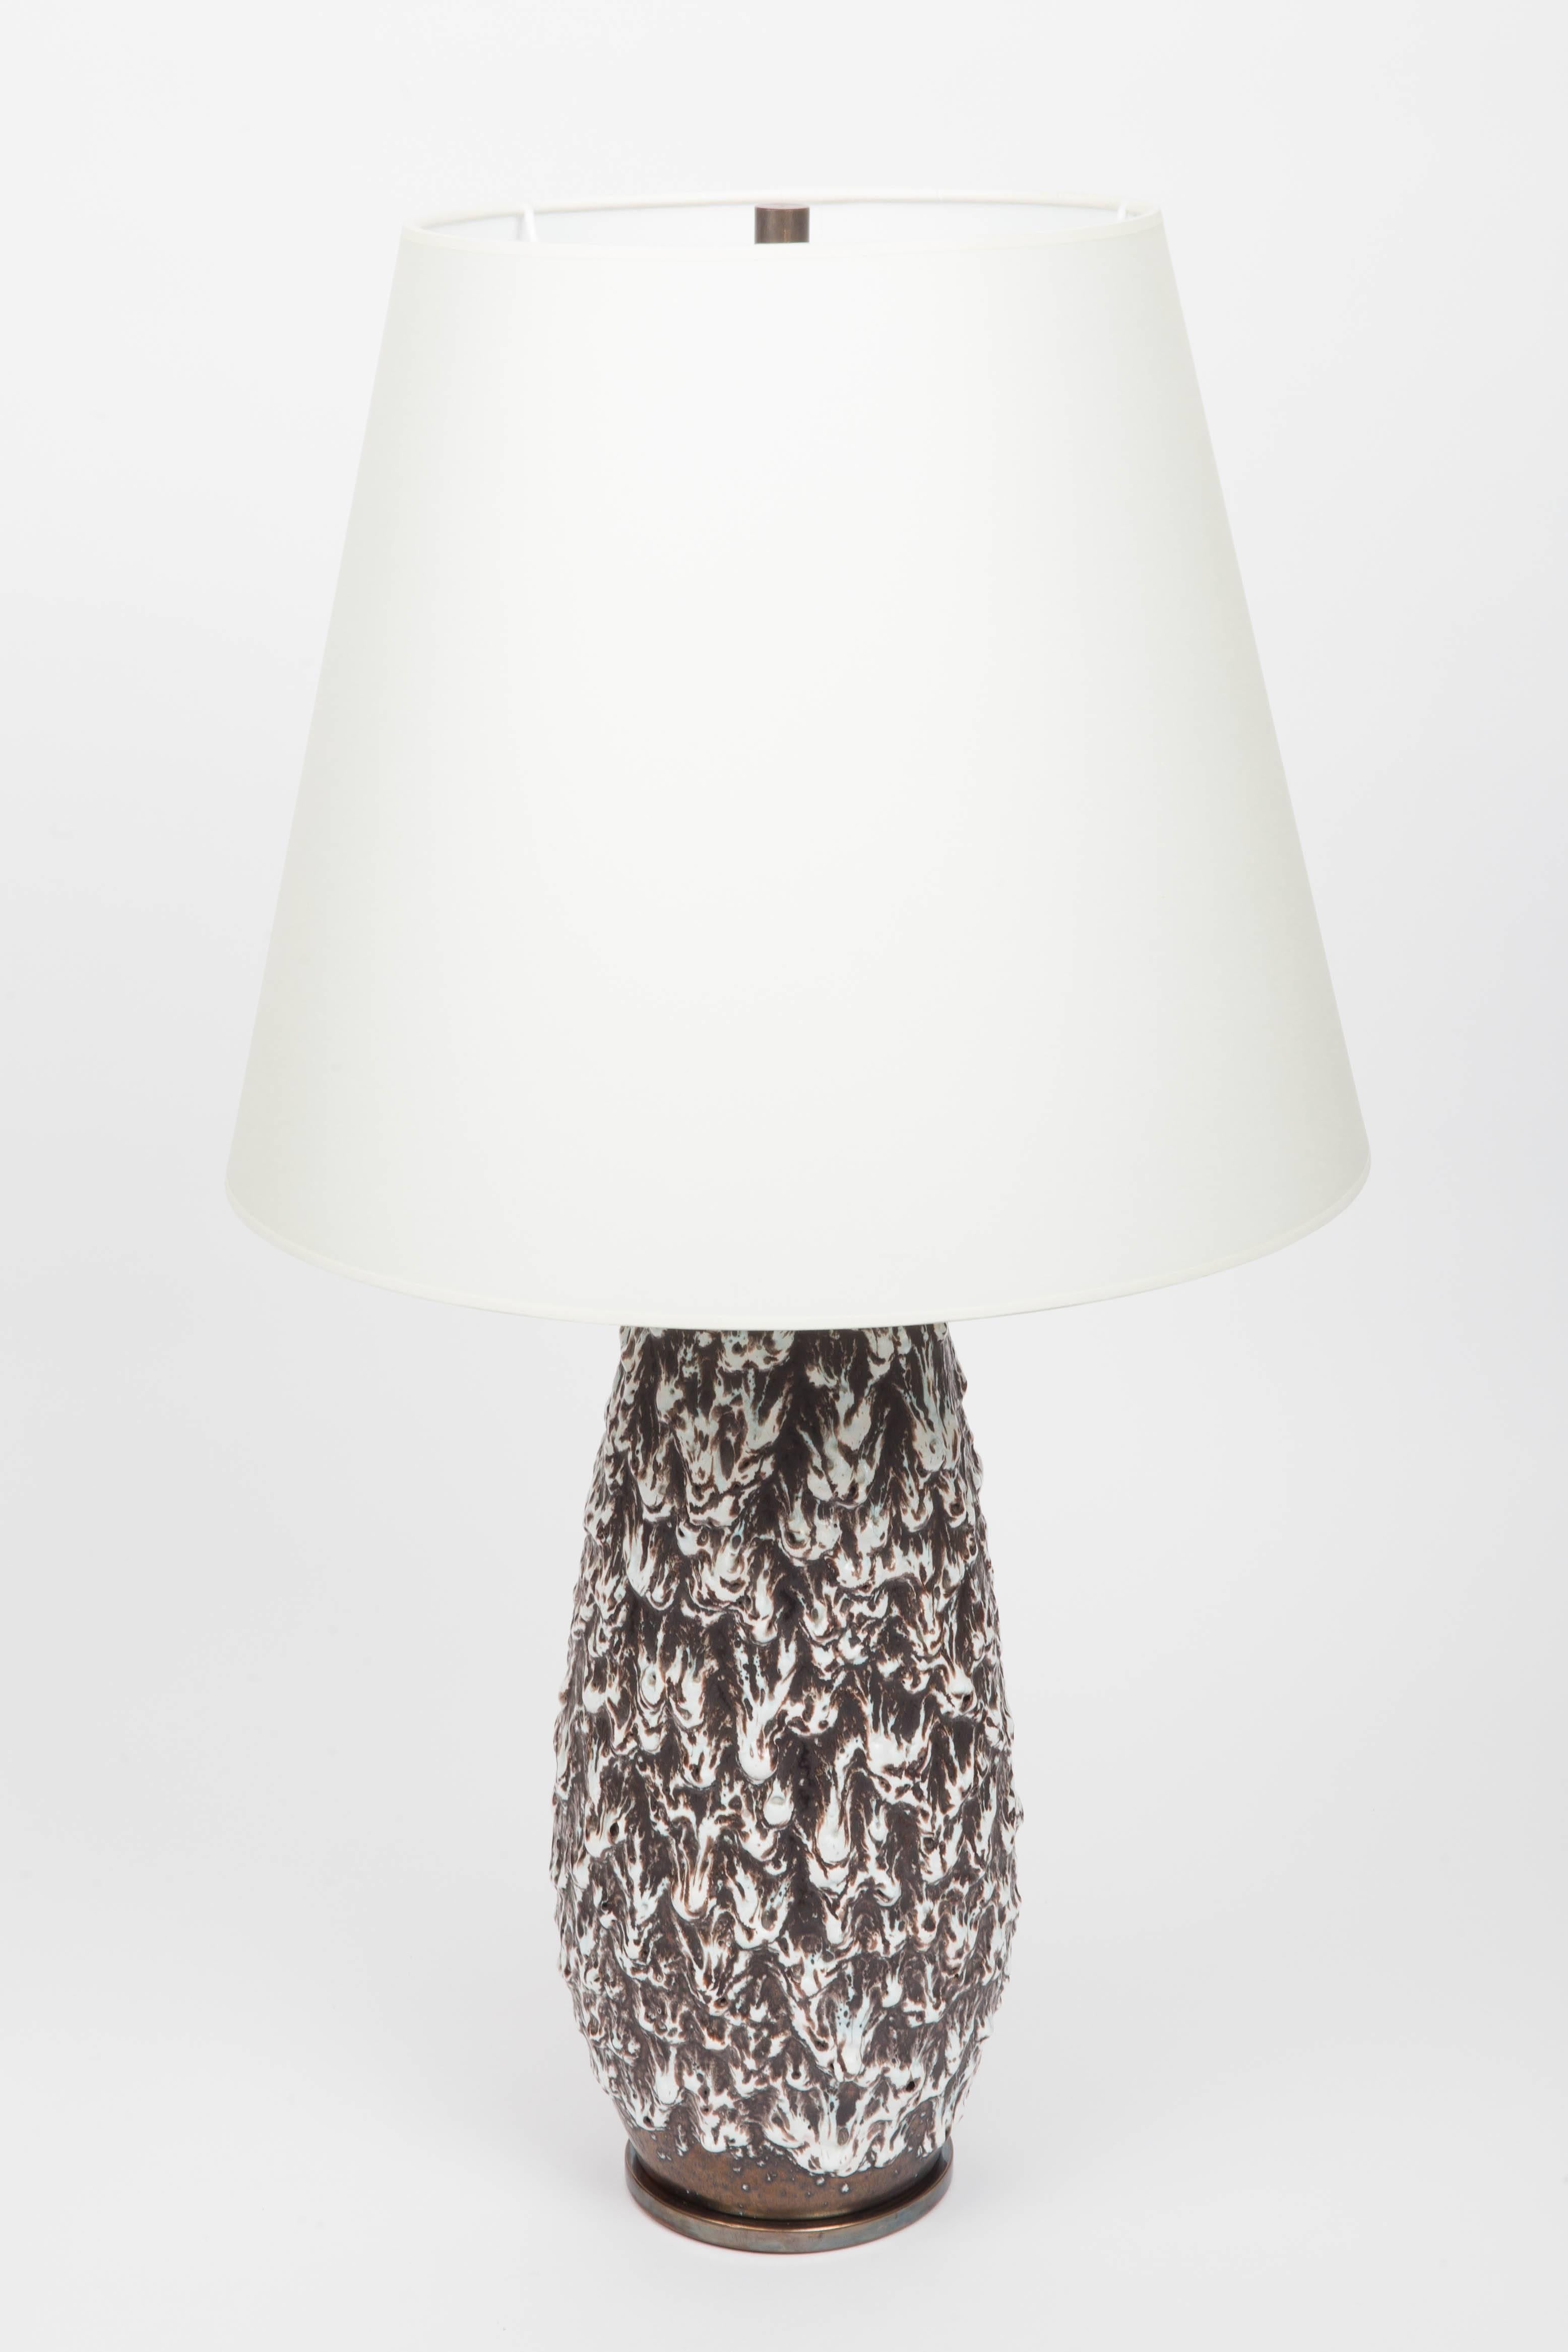 Brown and White Fat Lava Vase Converted into Lamp 2